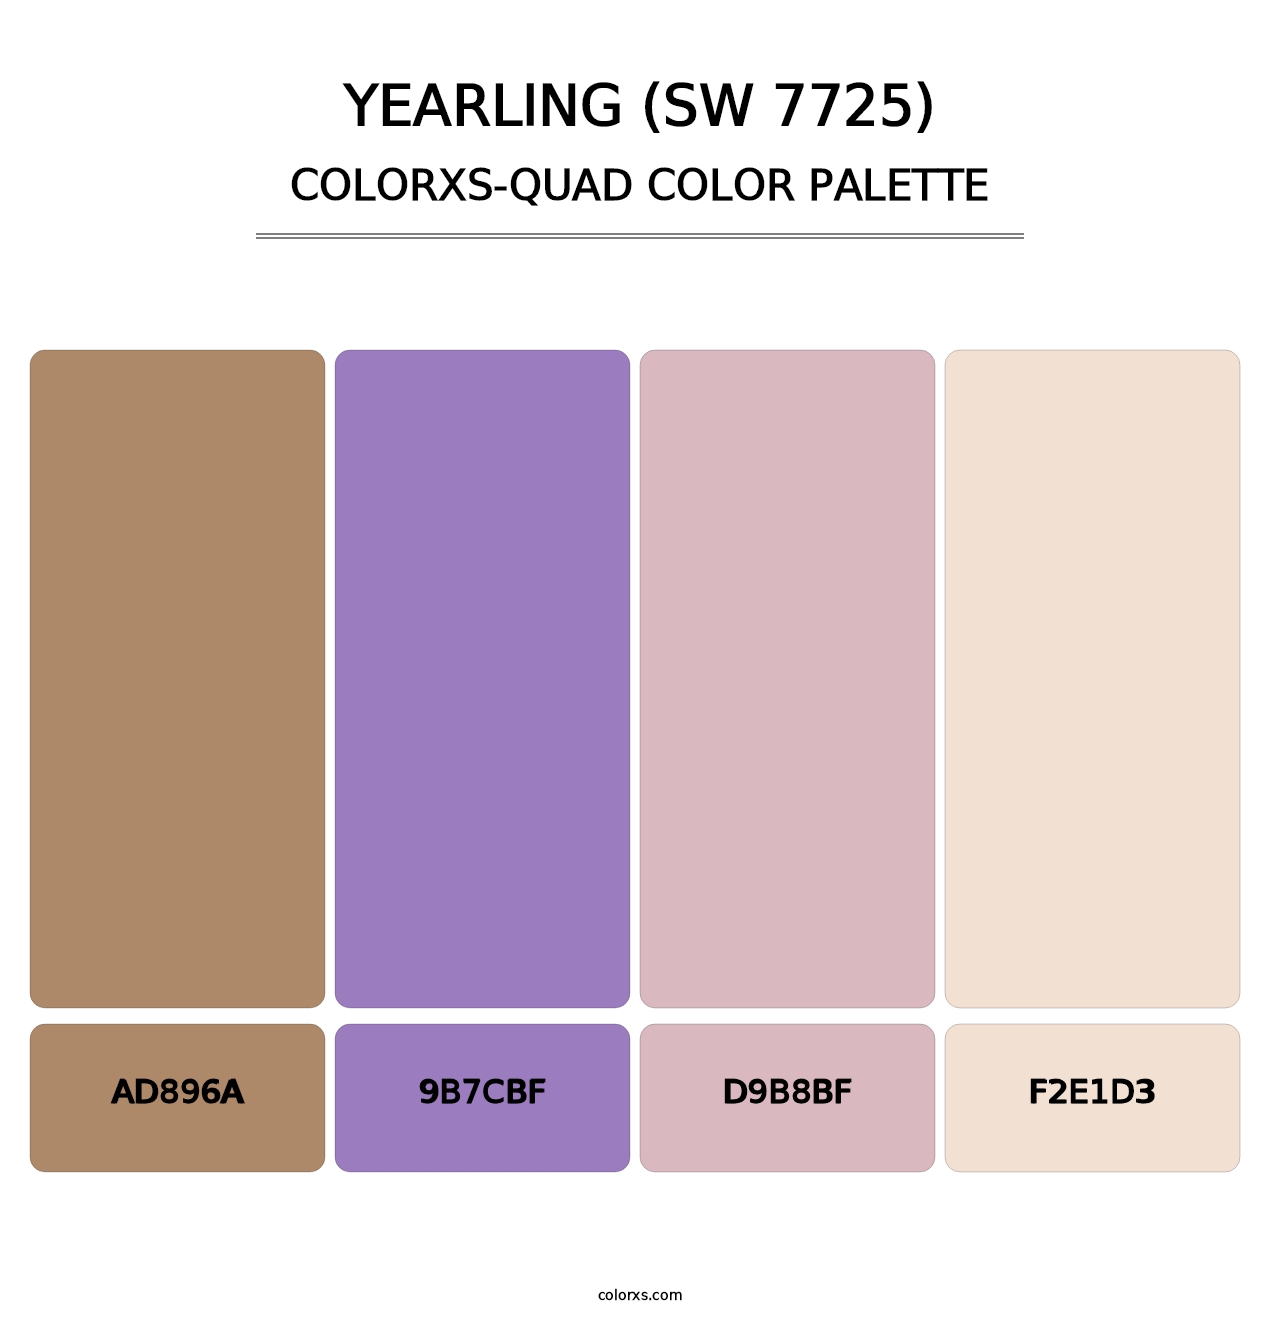 Yearling (SW 7725) - Colorxs Quad Palette